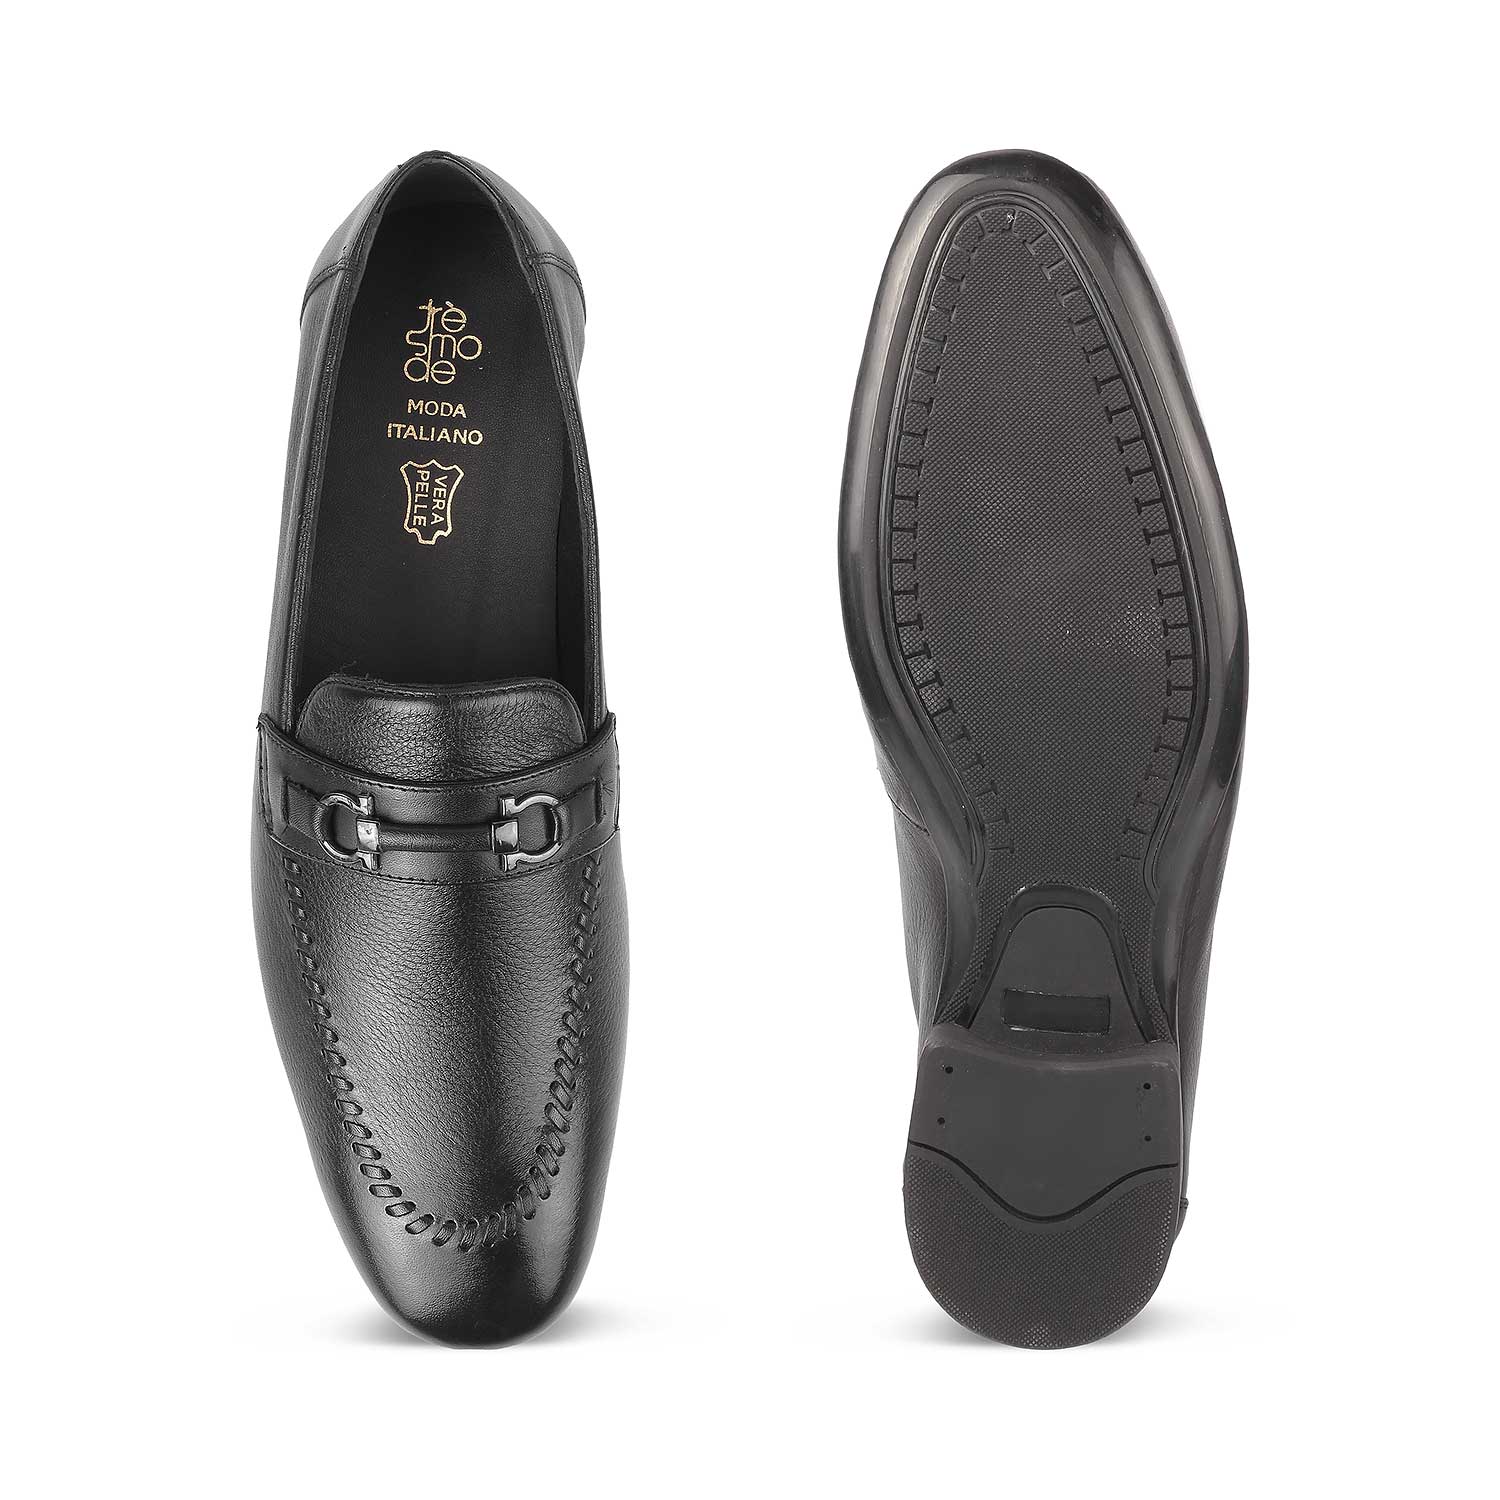 The Bologna Black Men's Leather Loafers Tresmode - Tresmode